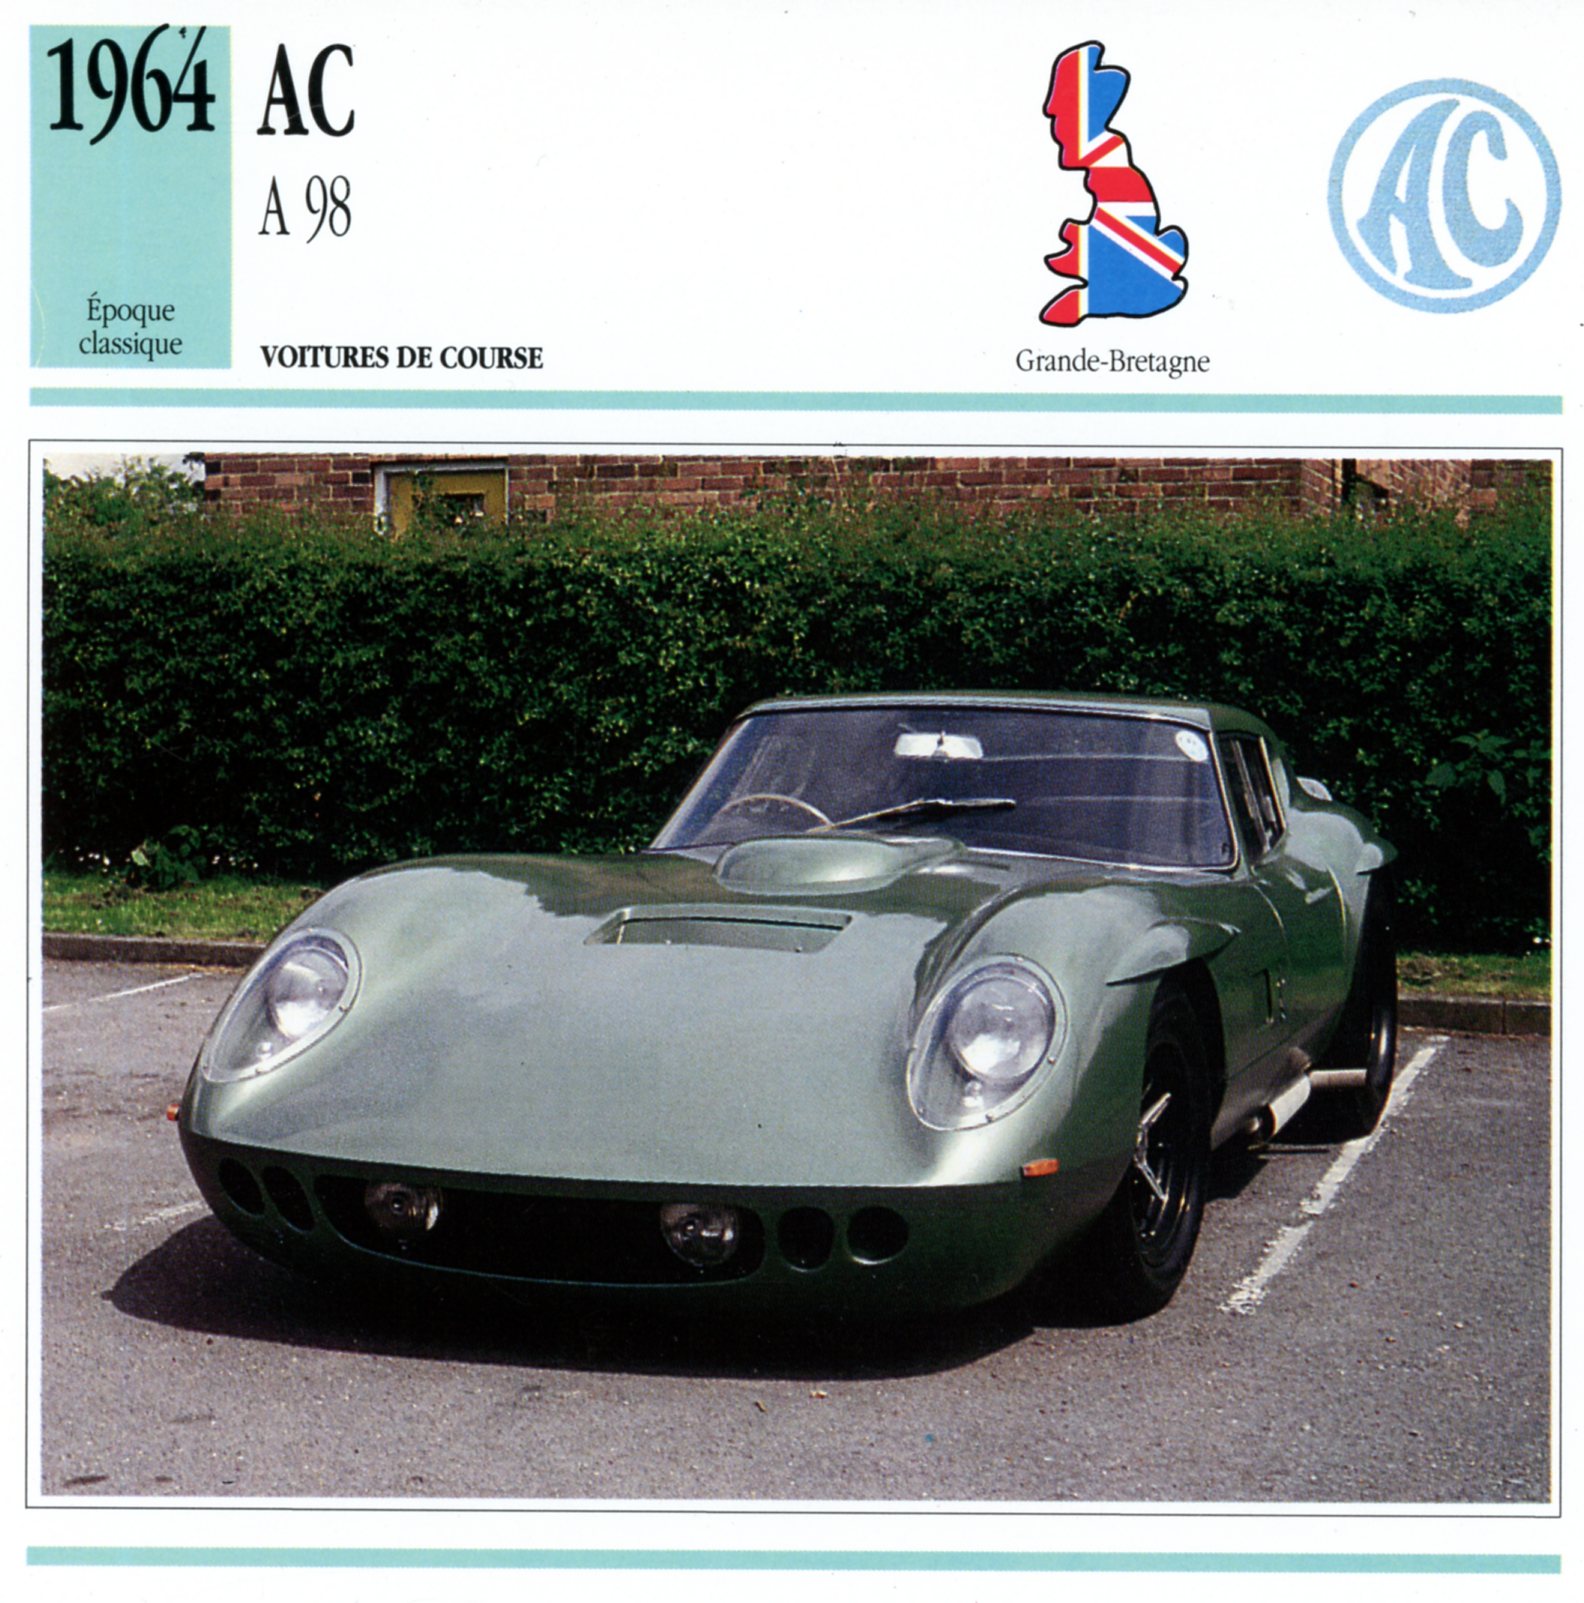 FICHE-AUTO-AC-A98-1964-LEMASTERBROCKERS-CARS-CARD